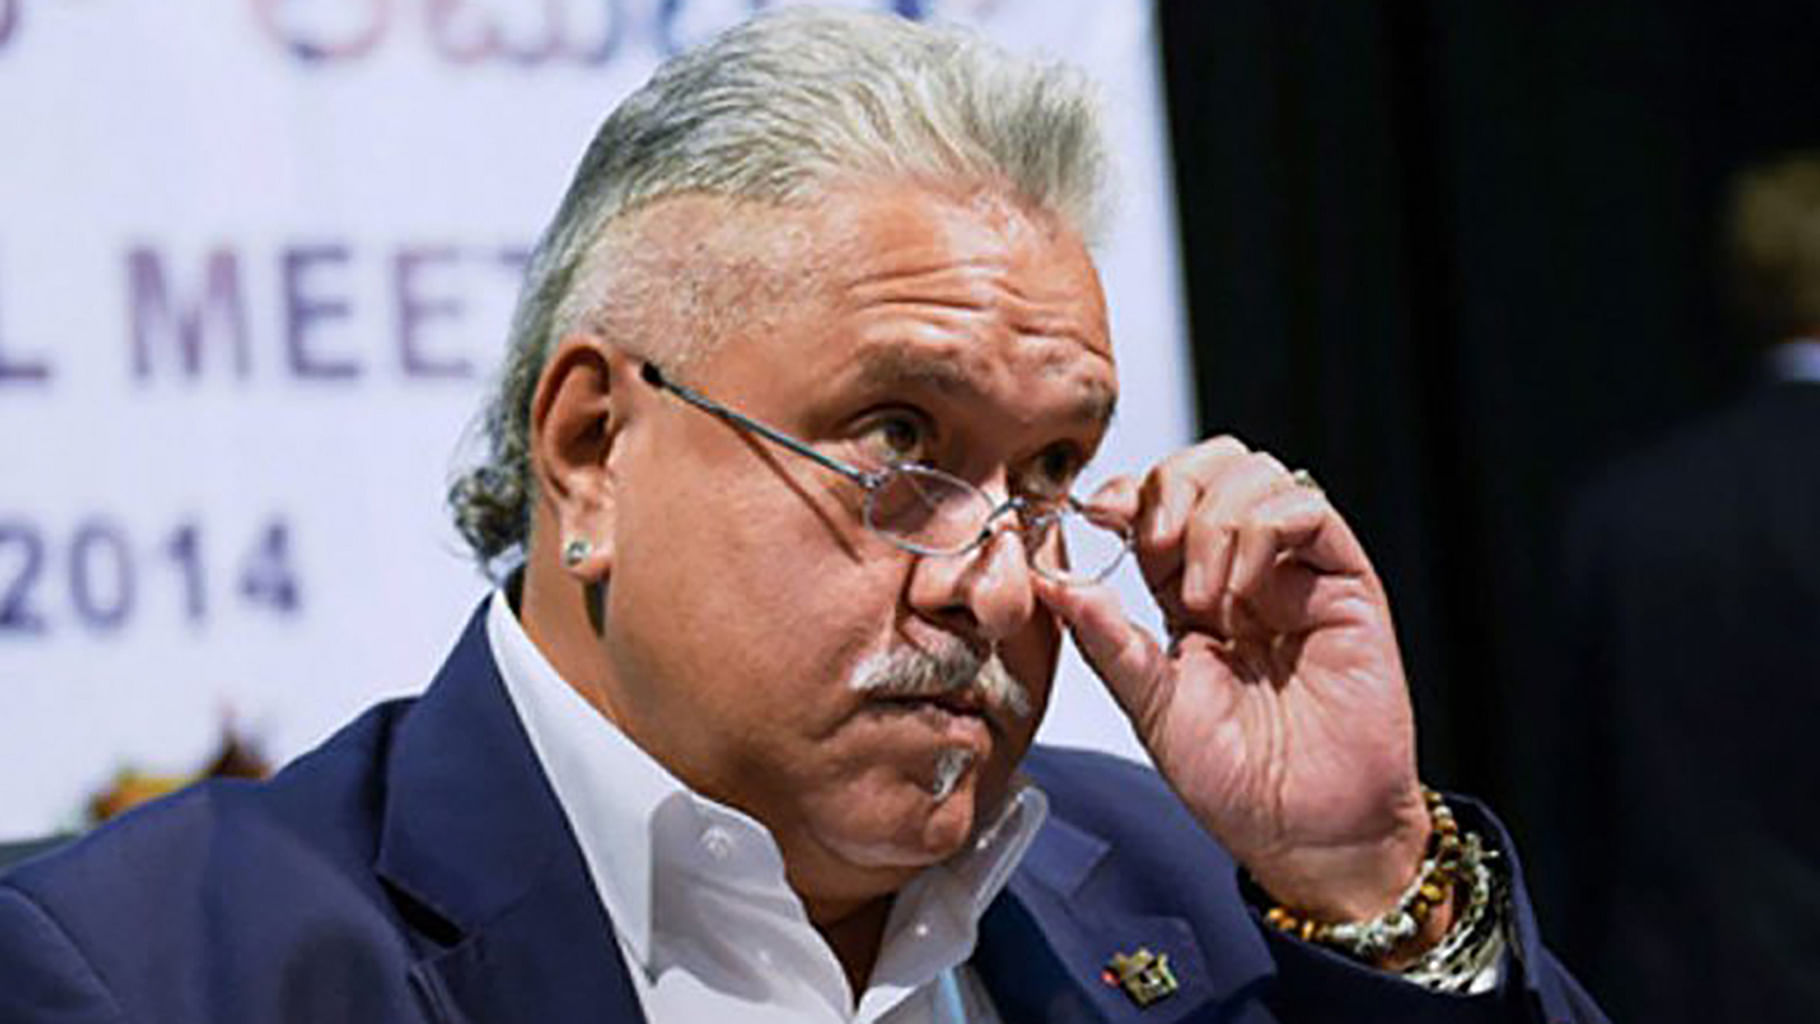  Vijay Mallya claims that he has ‘humbly obeyed every single court order’ (Photo: PTI)